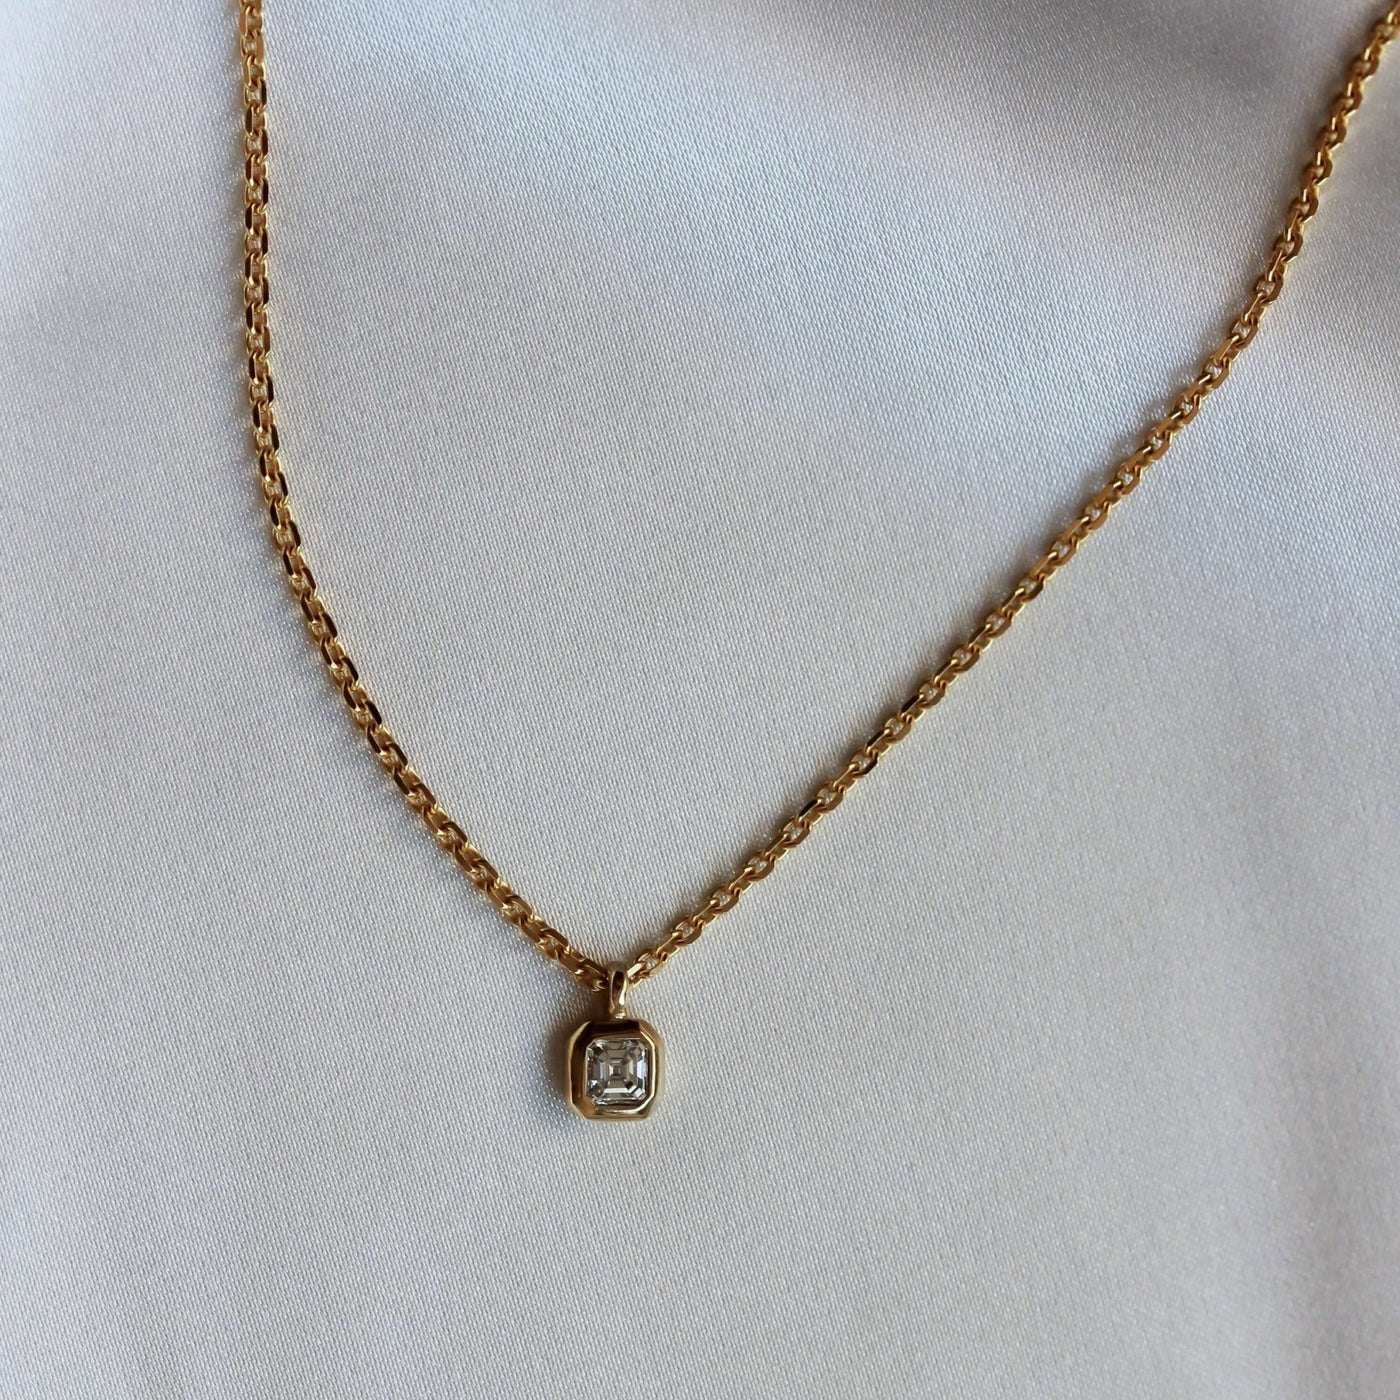 Wide Toulouse Necklace 14K Gold White Diamond Necklaces 